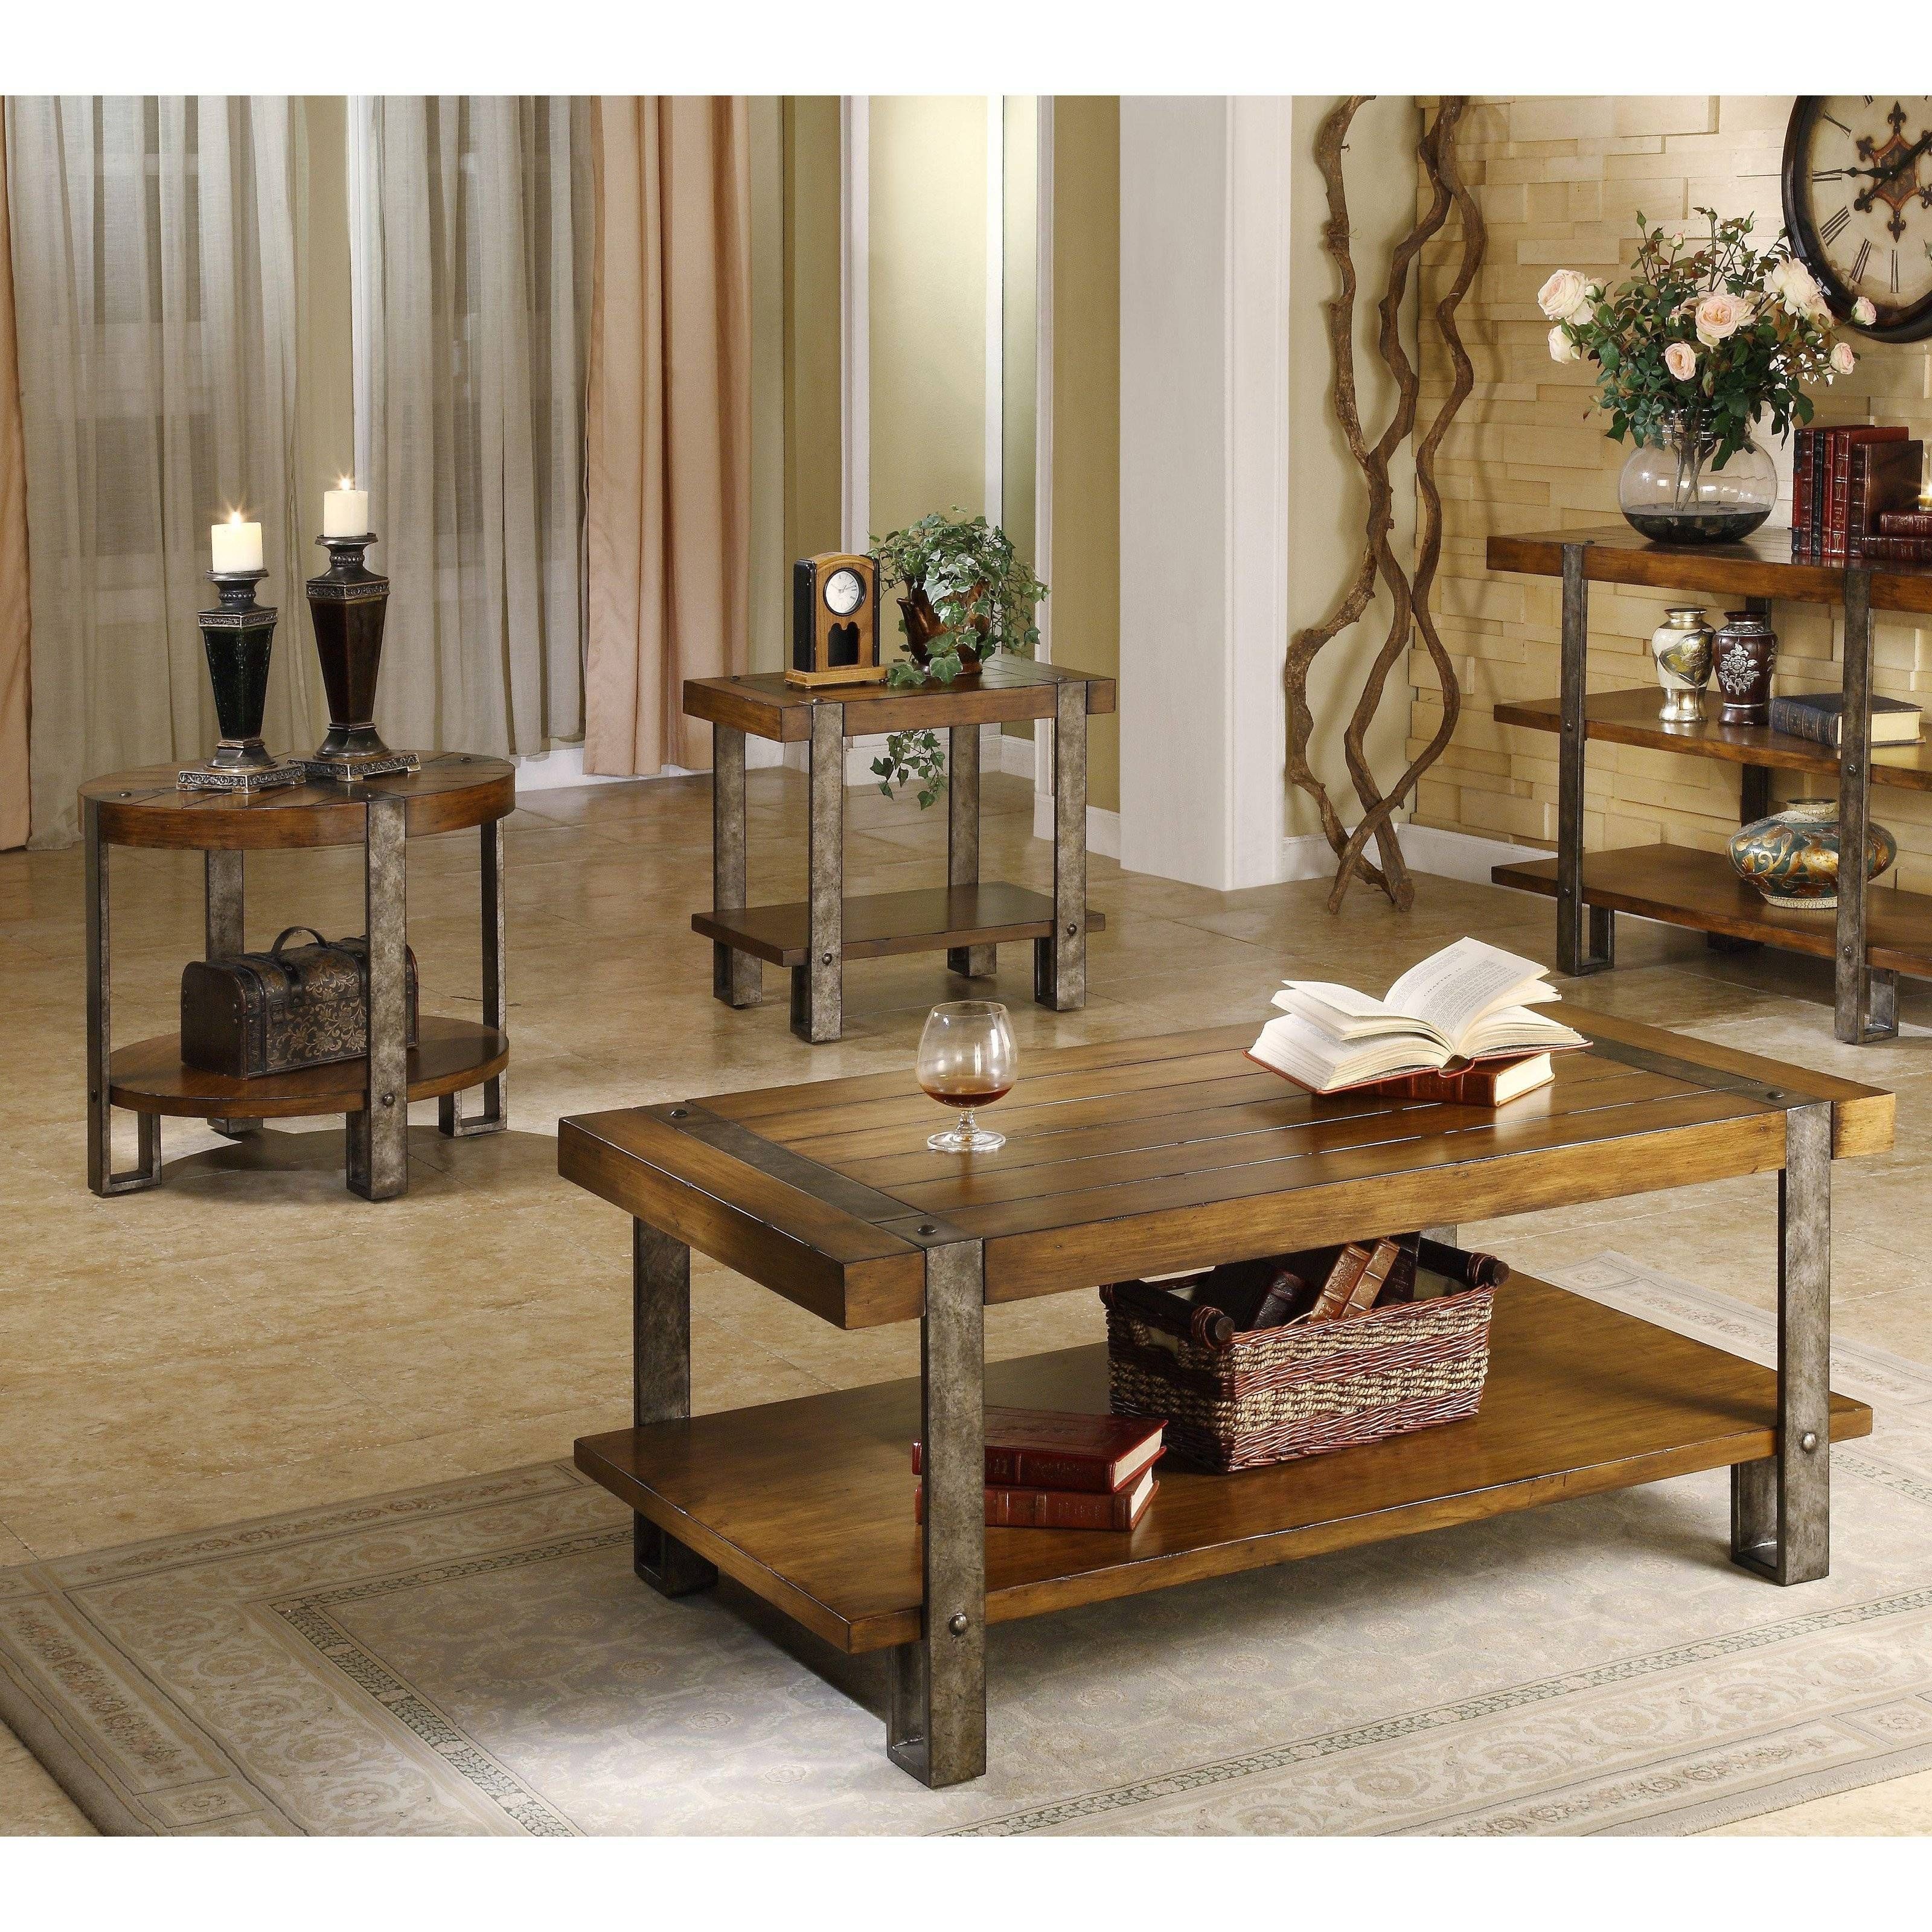 Gorgeous Inspiration 3 Piece Table Set For Living Room | All Intended For 2 Piece Coffee Table Sets (View 17 of 30)